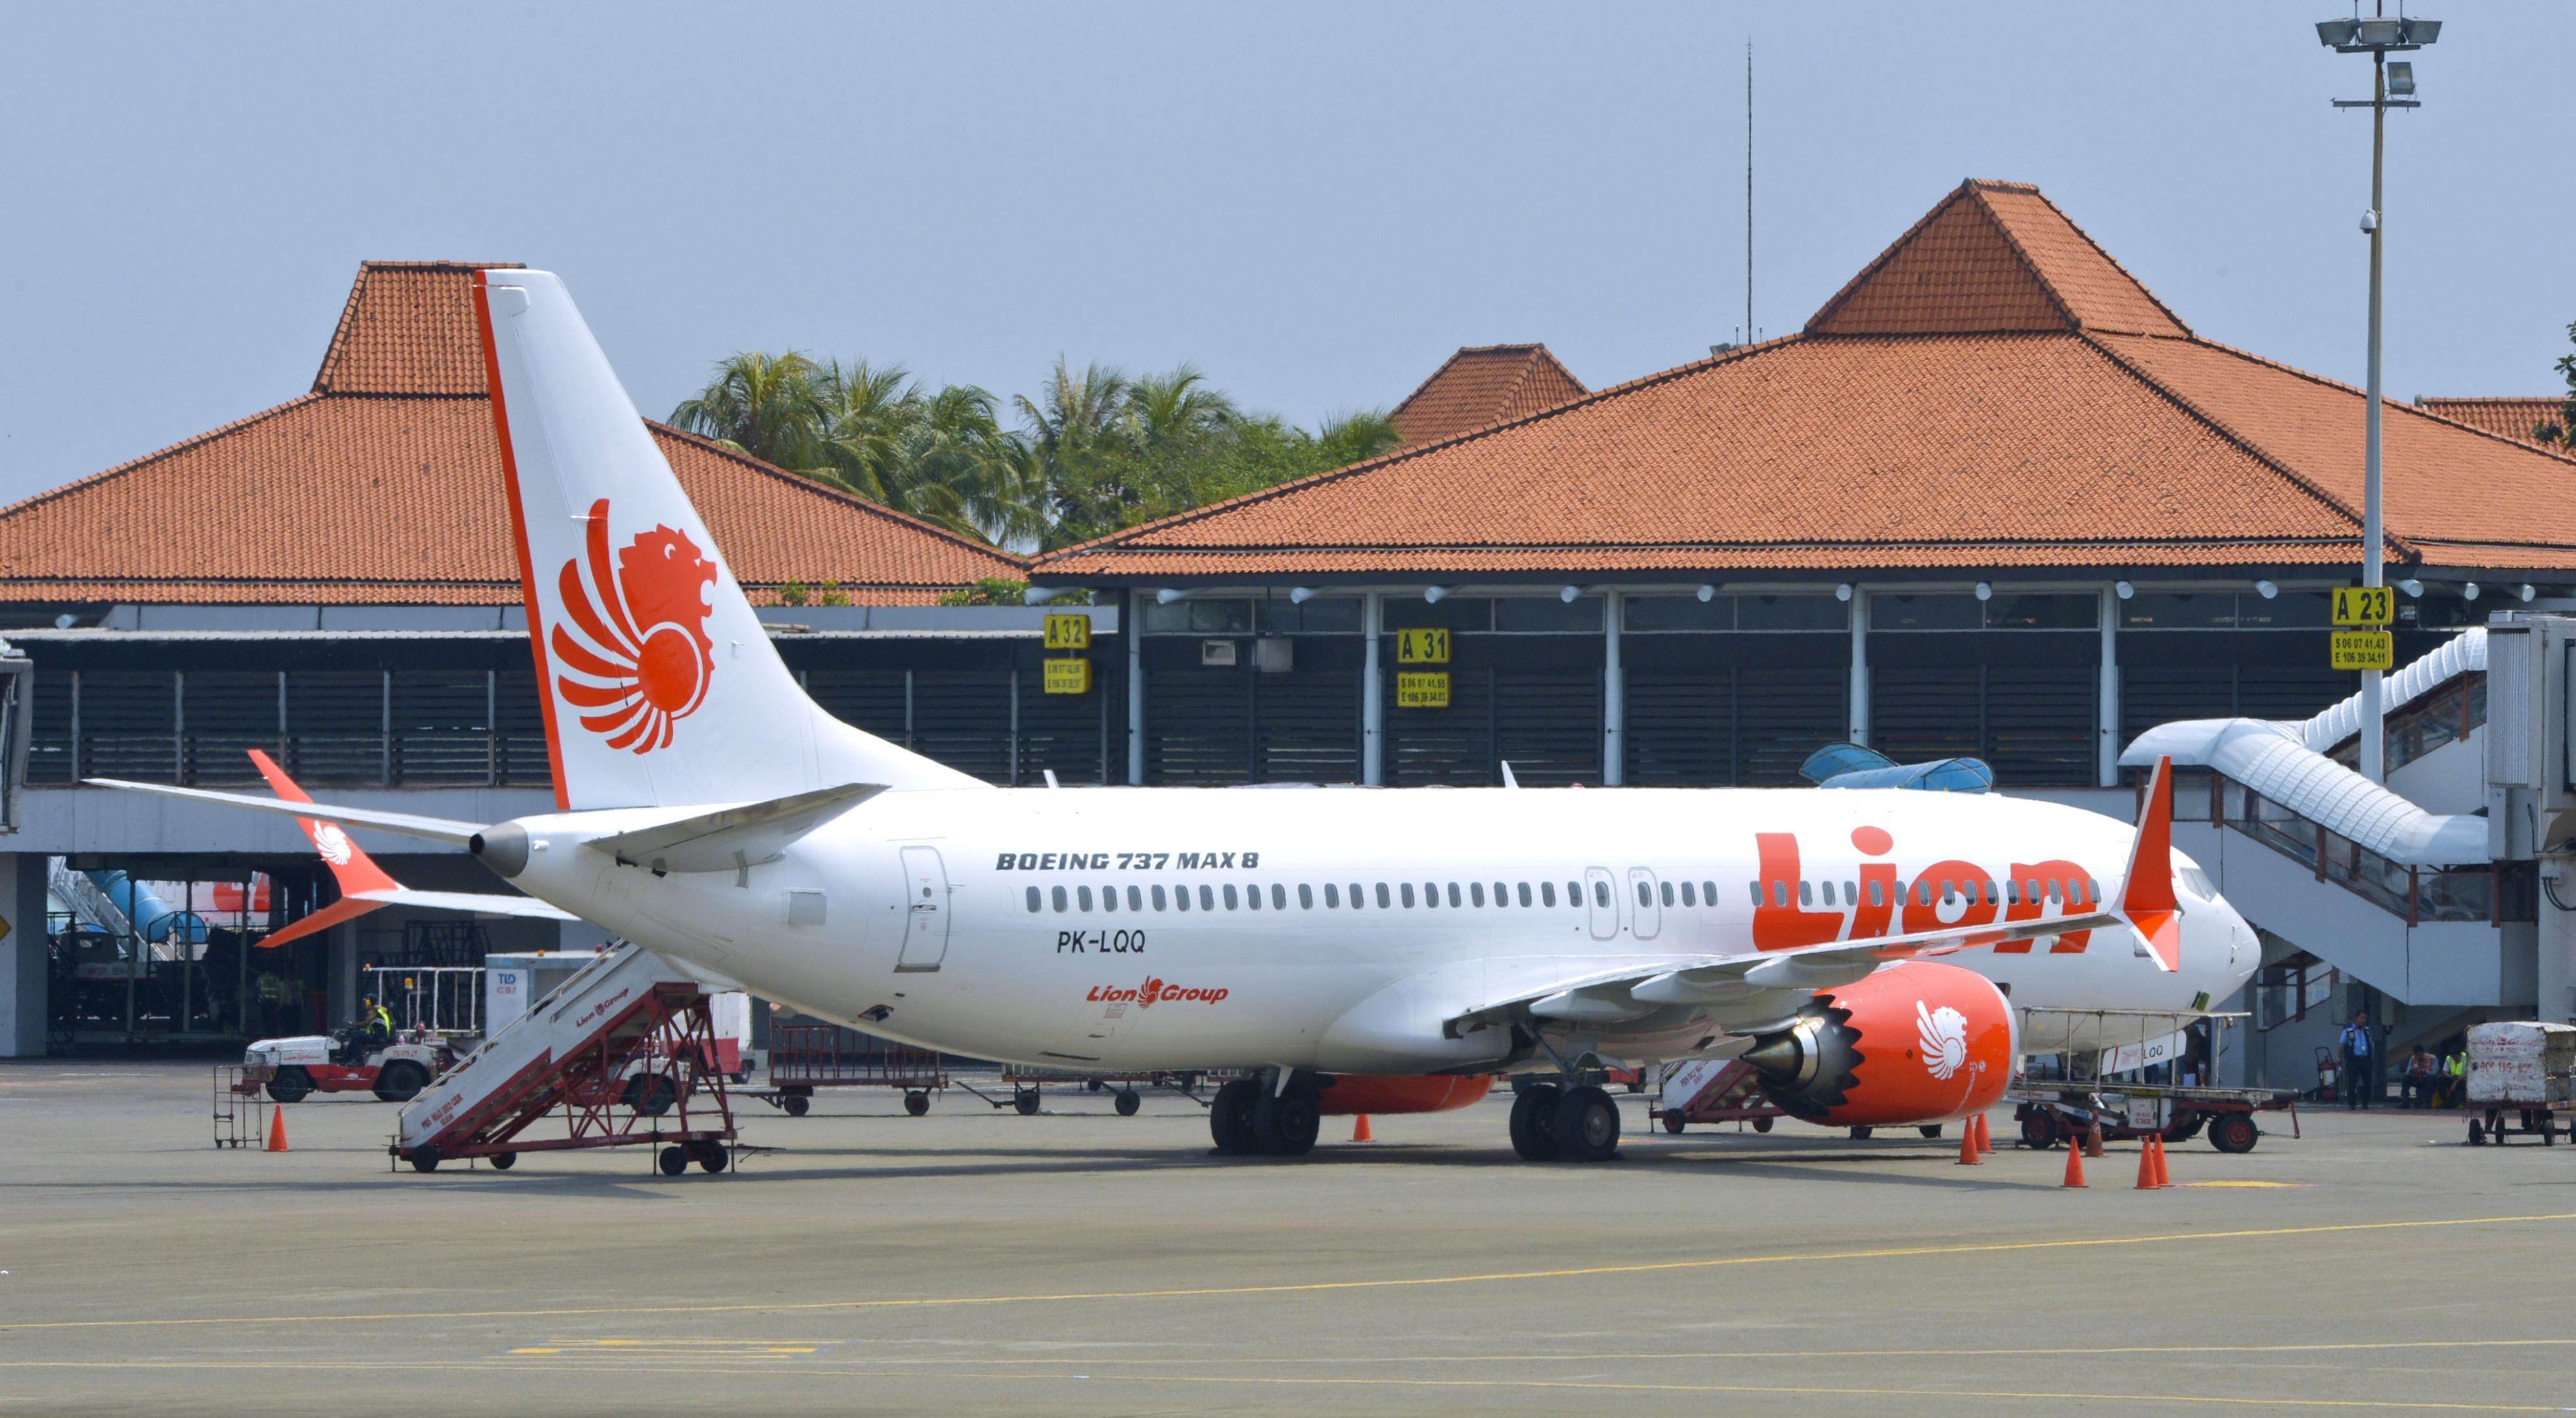 A Lion Air passenger jet of the Boeing 737 MAX 8 series at Jakarta Airport. The same type of aircraft belonging to the airline crashed into the Java Sea off Jakarta on October 29, 2018 with 189 people on board. Photo: Kyodo News Stills via Getty Images